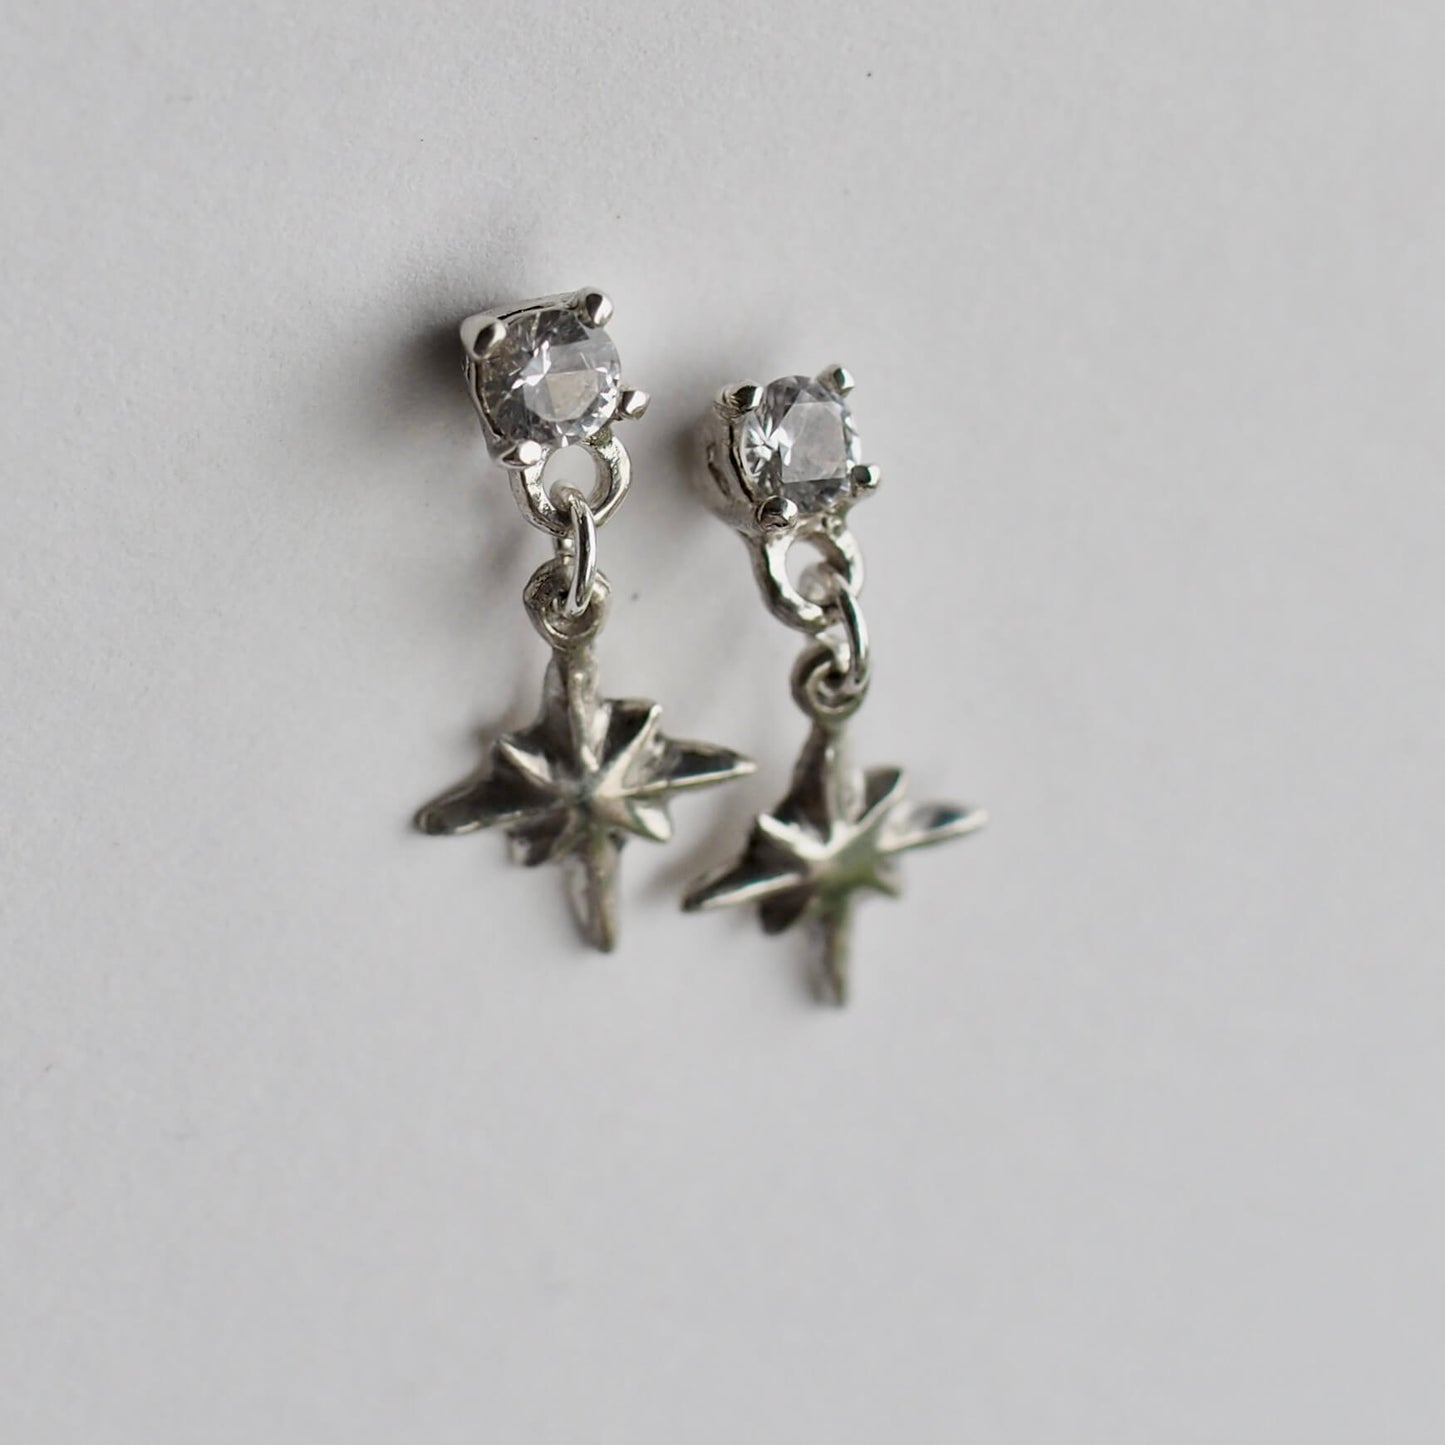 Tiny dangly star earrings set with 4mm clear cubic zirconia, in sterling silver. Made by Iron Oxide Designs